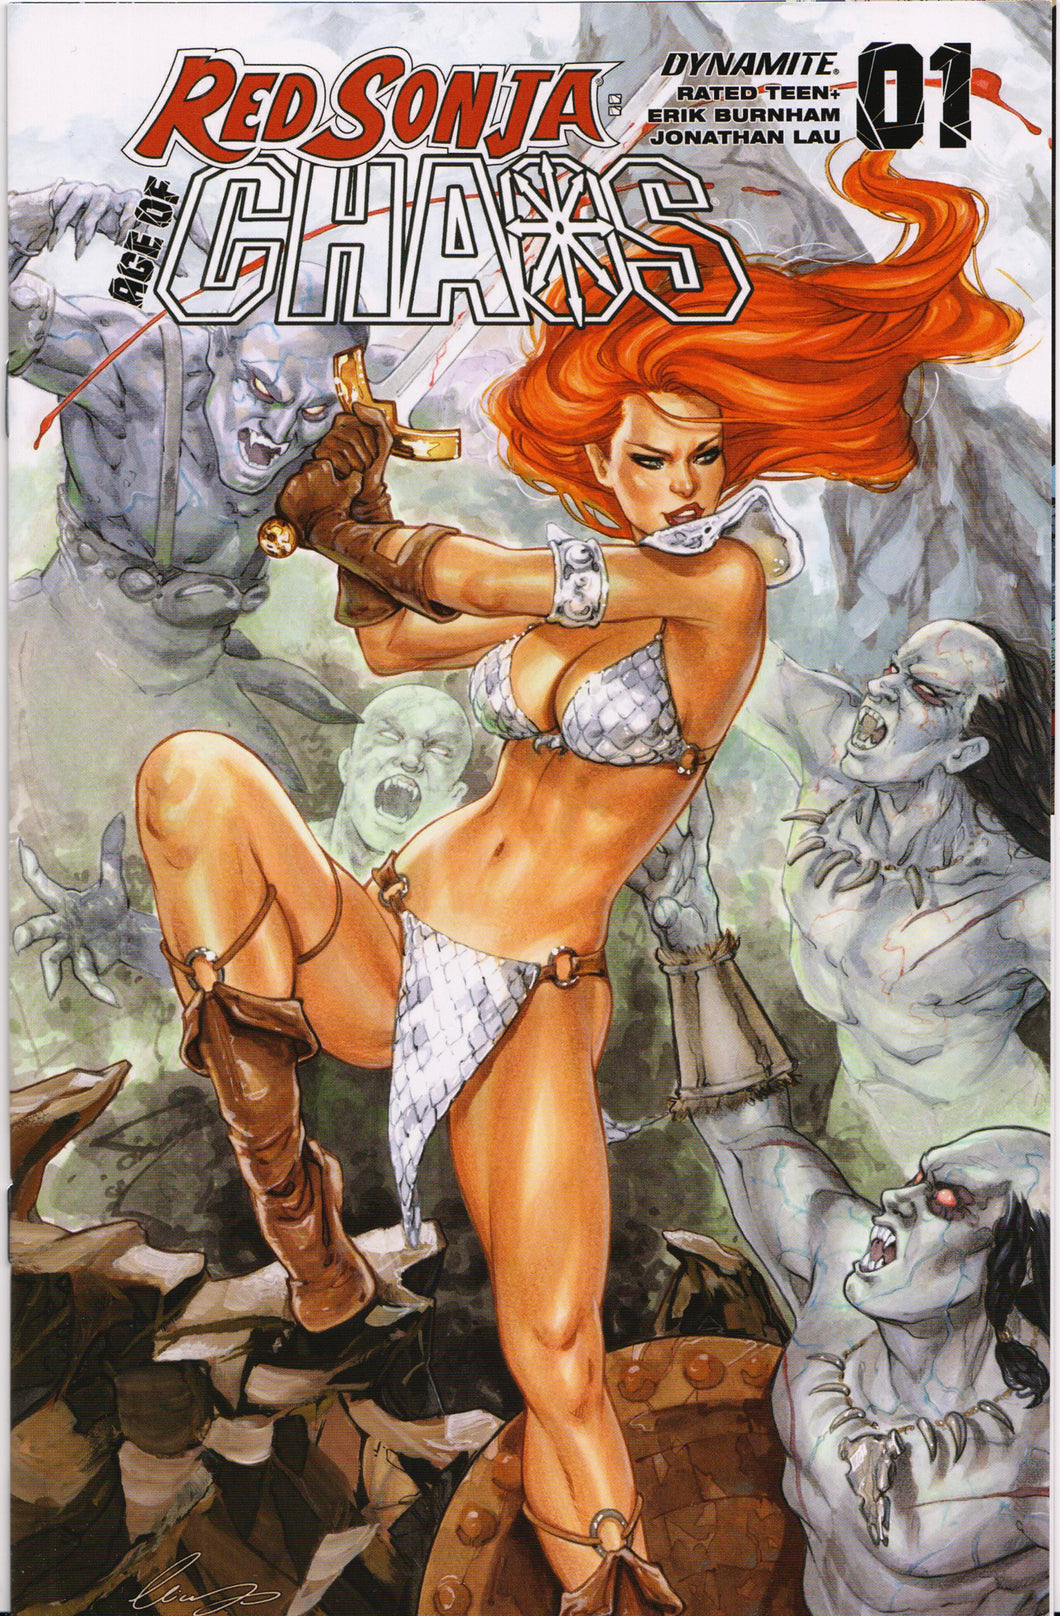 RED SONJA: AGE OF CHAOS #1 (CHATZOUDIS VARIANT) COMIC BOOK ~ Dynamite